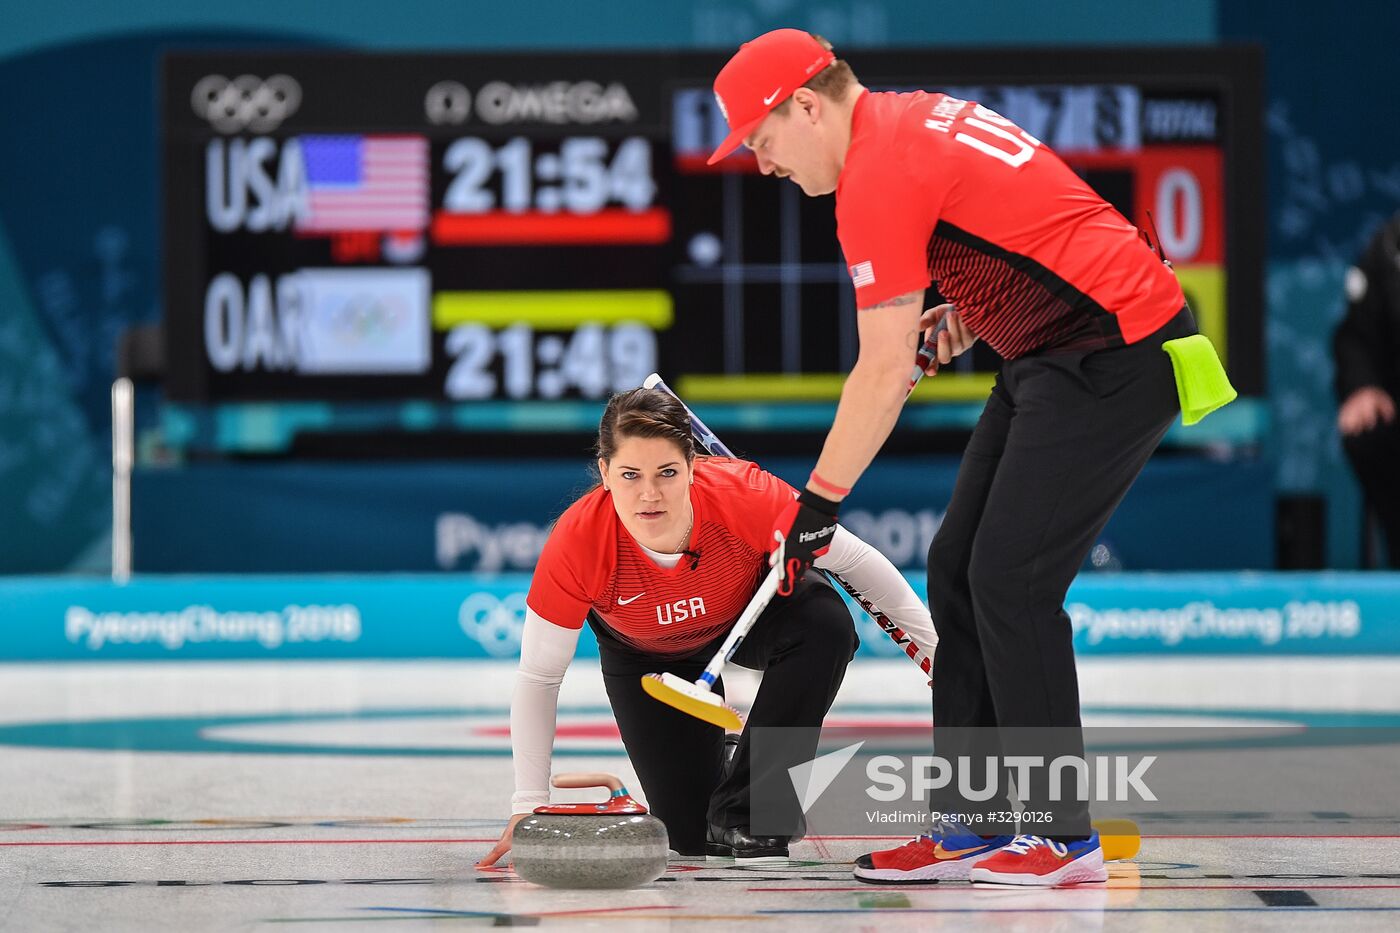 2018 Winter Olympics. Curling. Mixed doubles. US vs. Russia